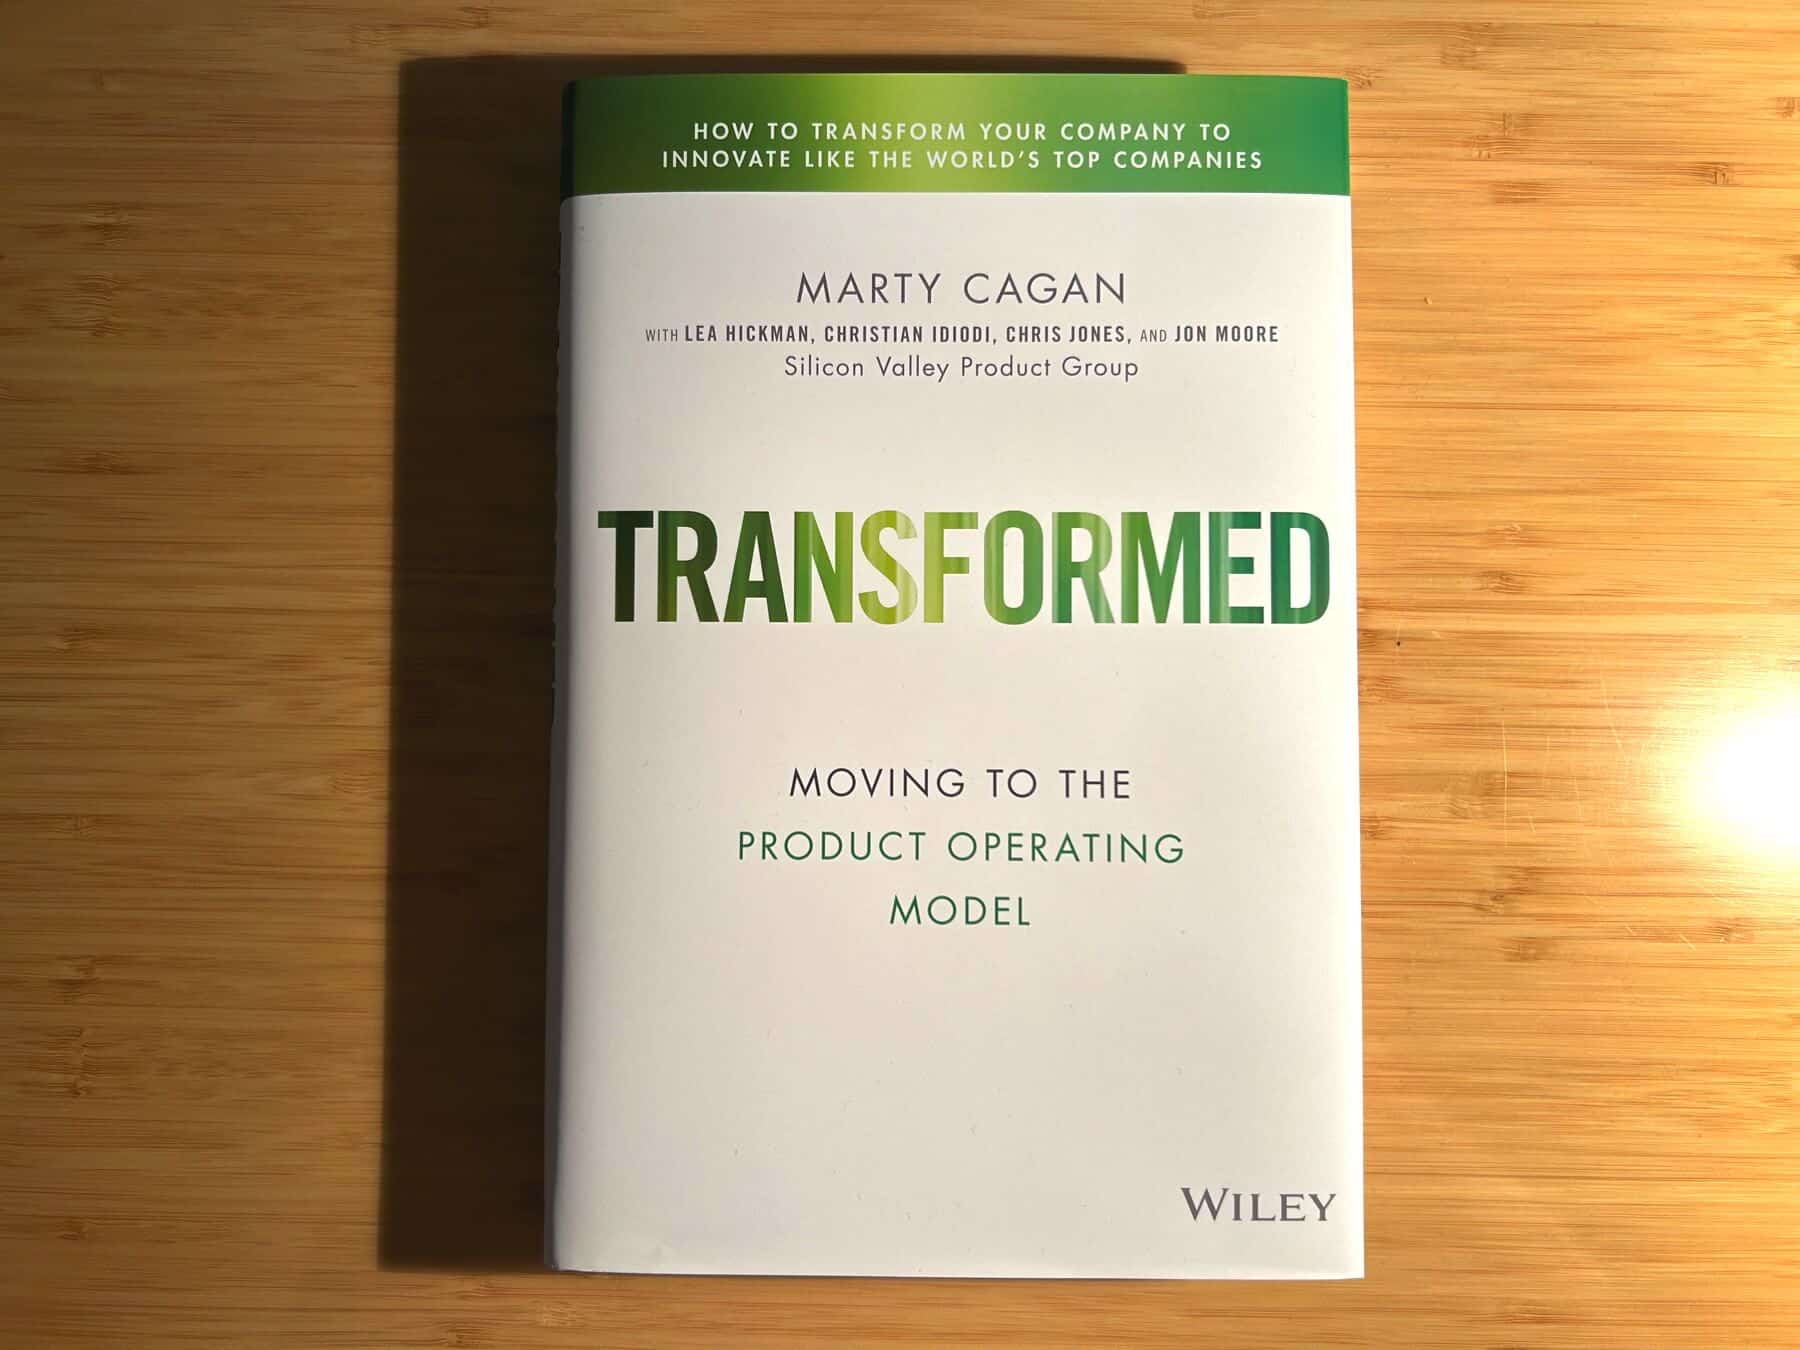 Marty Cagan highlights the Product Operating Model from his Book “Transformed” and analyzes Scrum’s usefulness — Berlin-Product-People.com